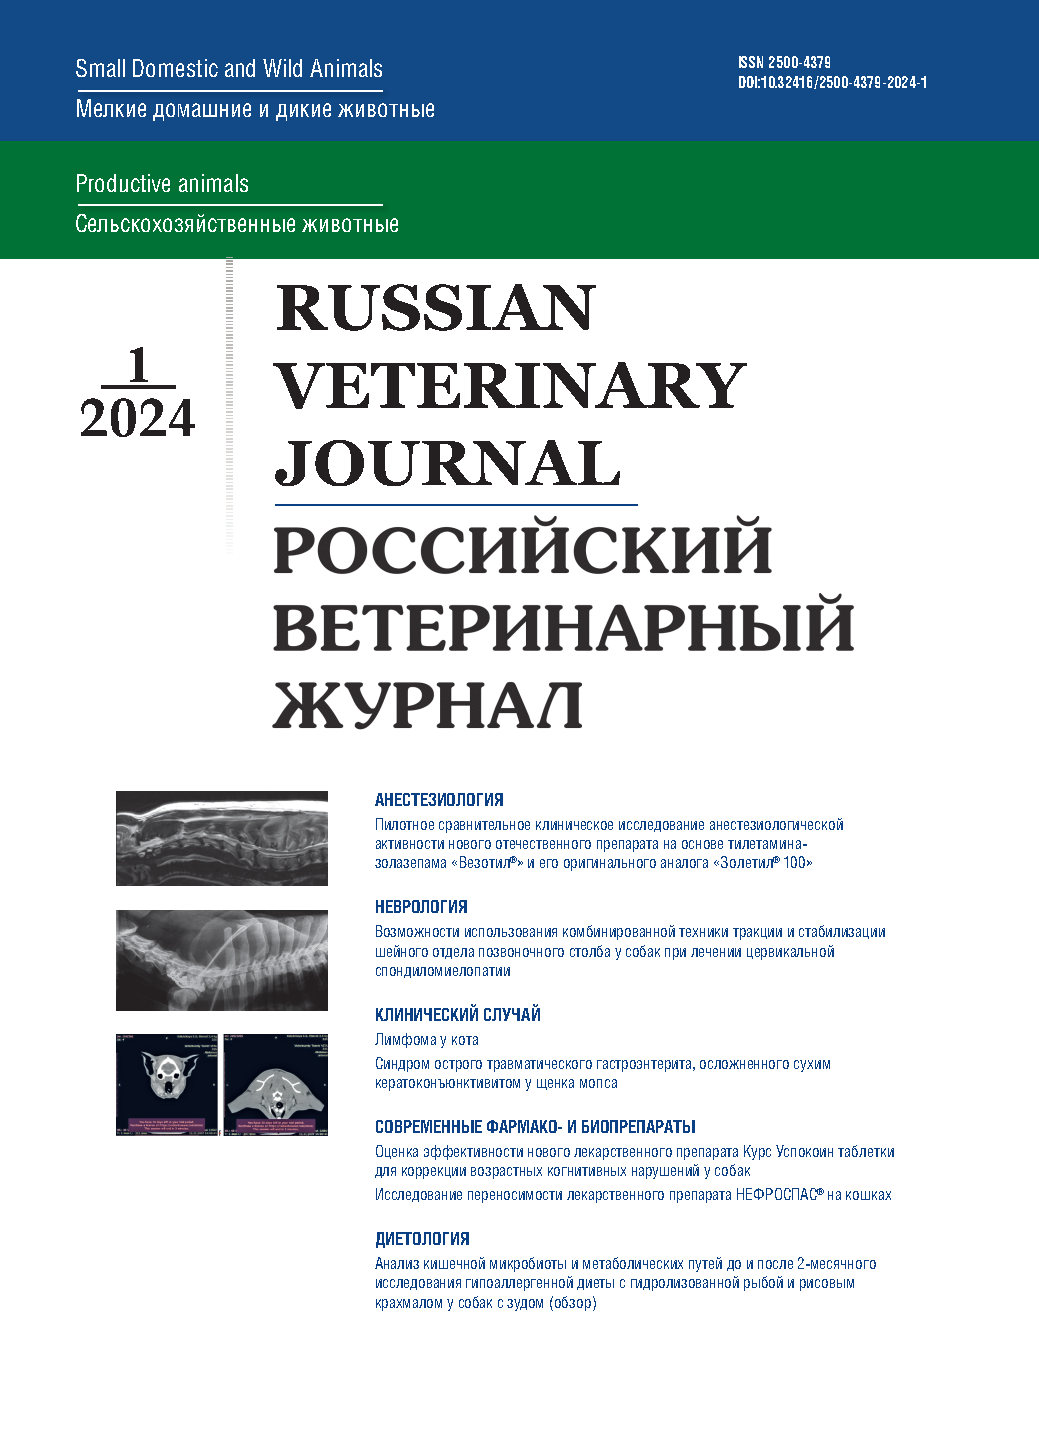                         The possibilities of using a combined surgical technique of traction and stabilization of the cervical spine in dogs with cervical spondylomyelopathy
            